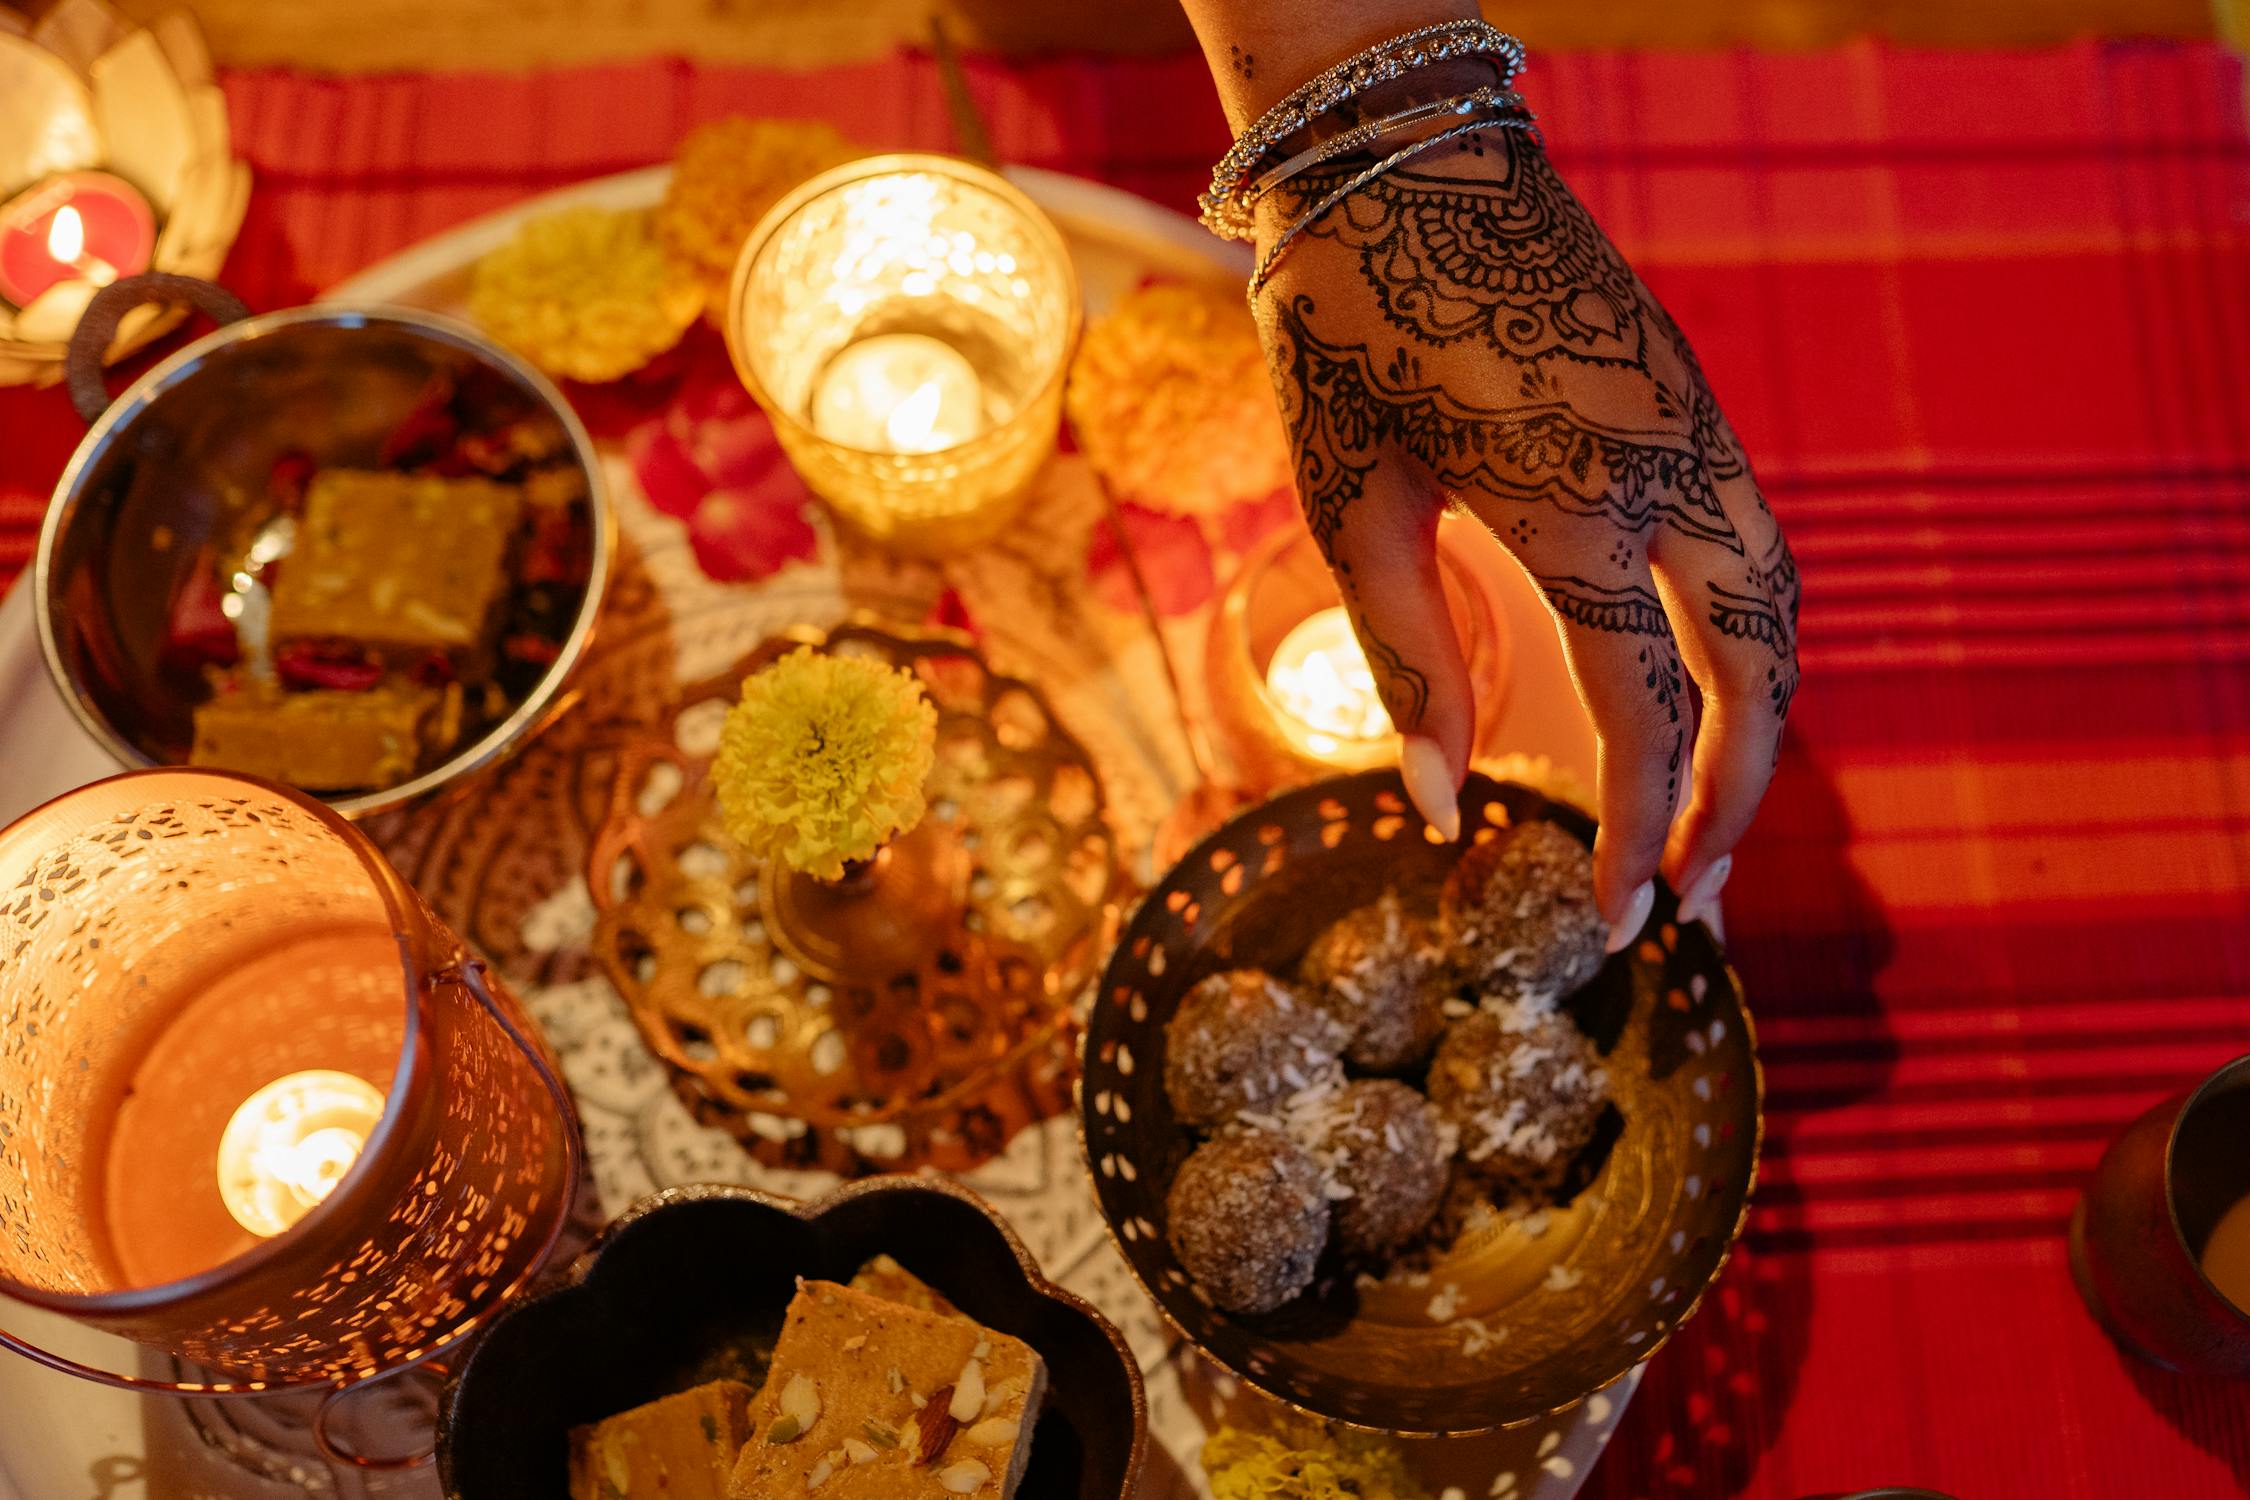 Puja Hinduism Photo by Yan Krukau from Pexels: https://www.pexels.com/photo/hand-of-a-woman-and-traditional-indian-treats-8818590/